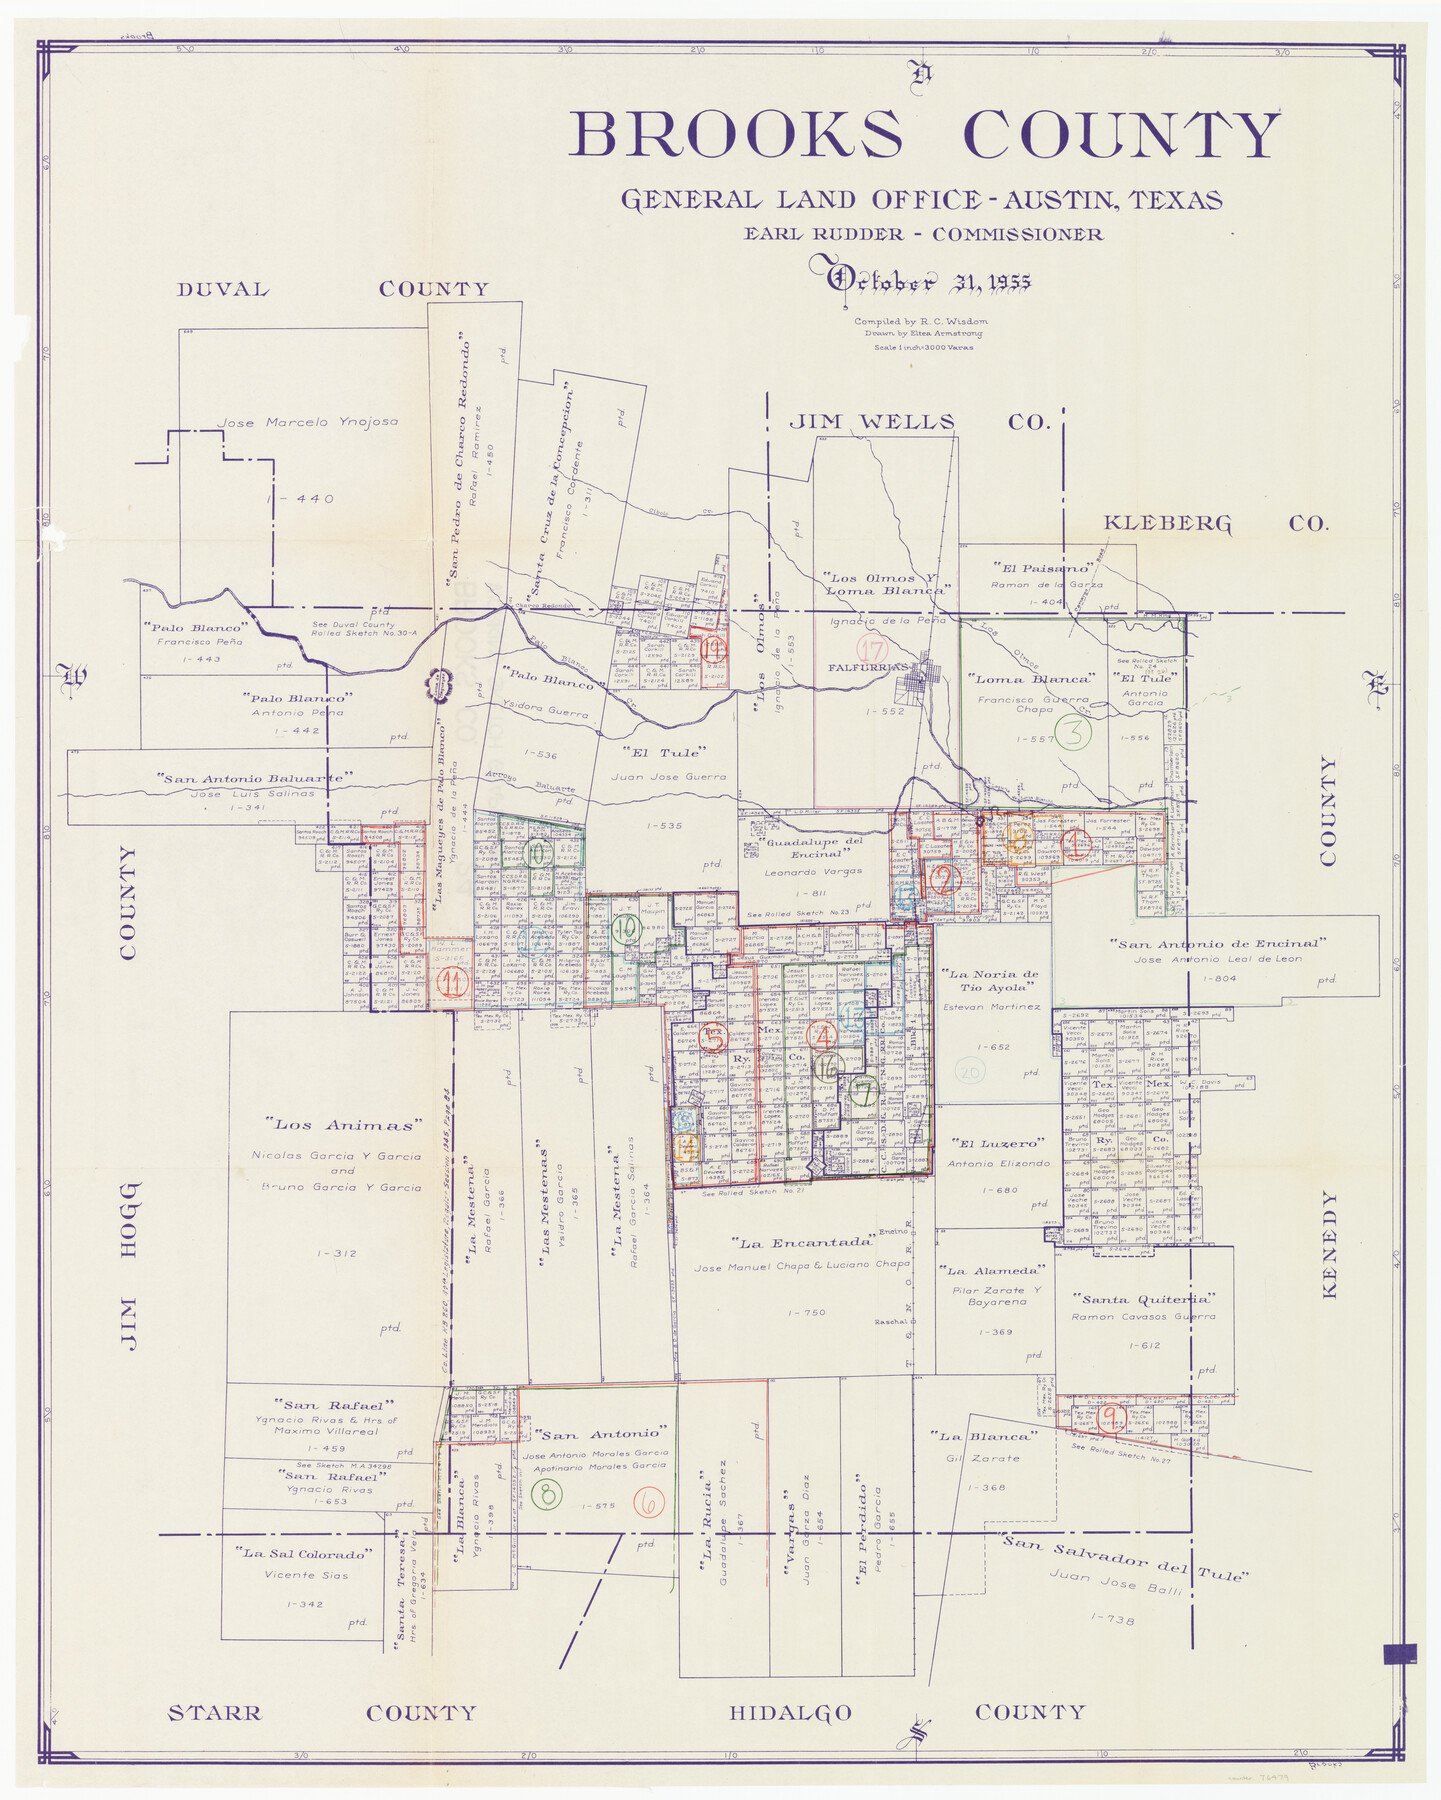 76479, Brooks County Working Sketch Graphic Index, General Map Collection